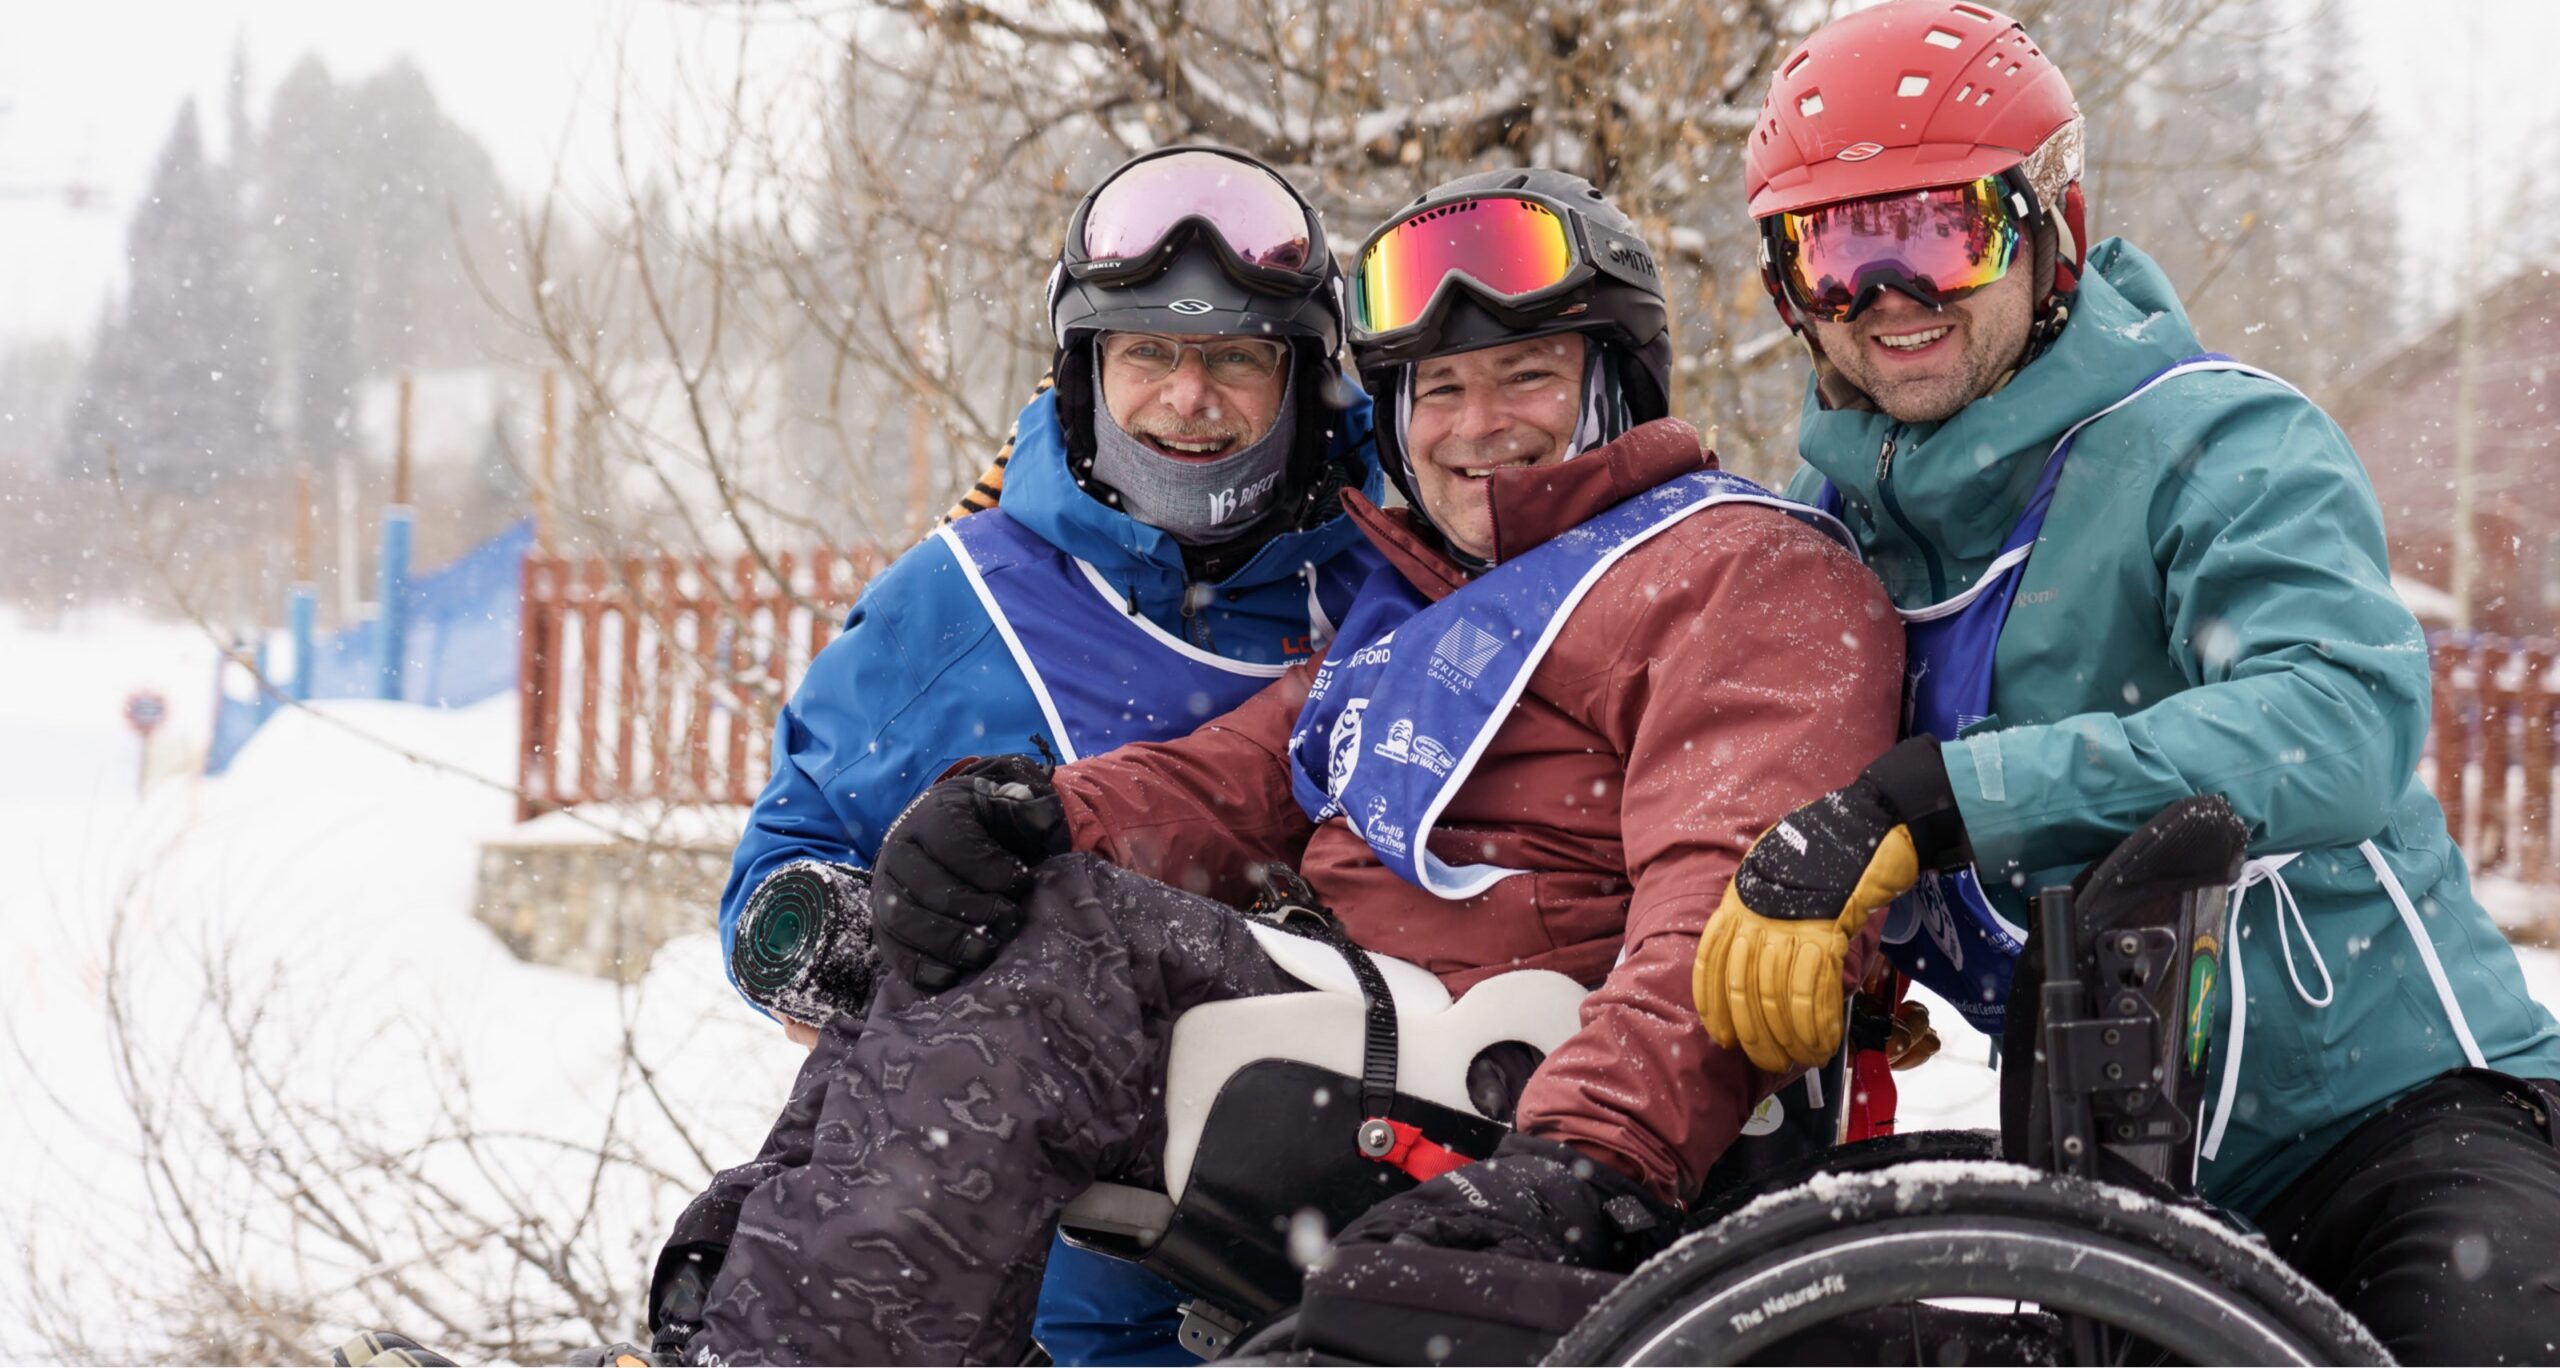 Three skiers smiling at camera on snow